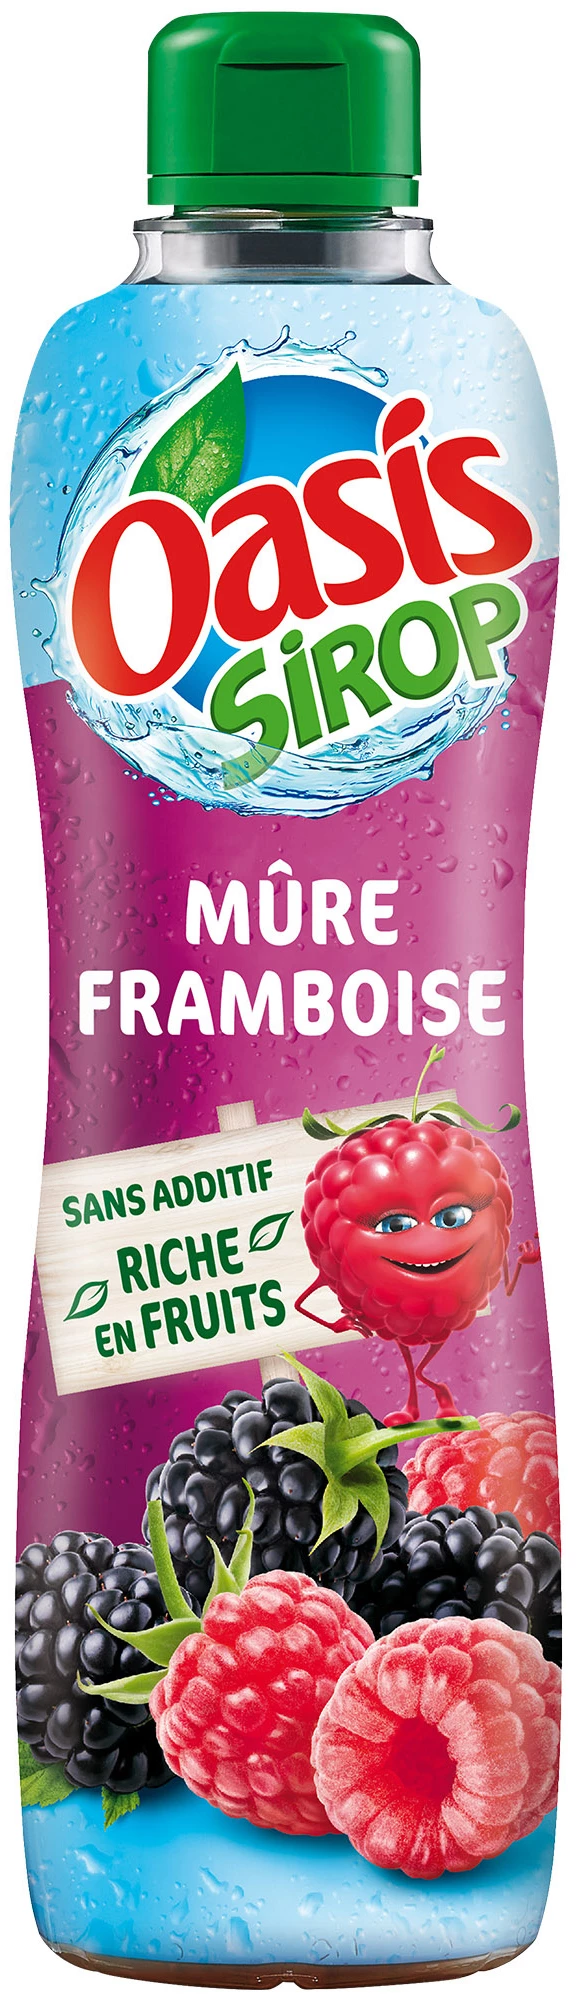 Oasis Framboise Mure 75cl